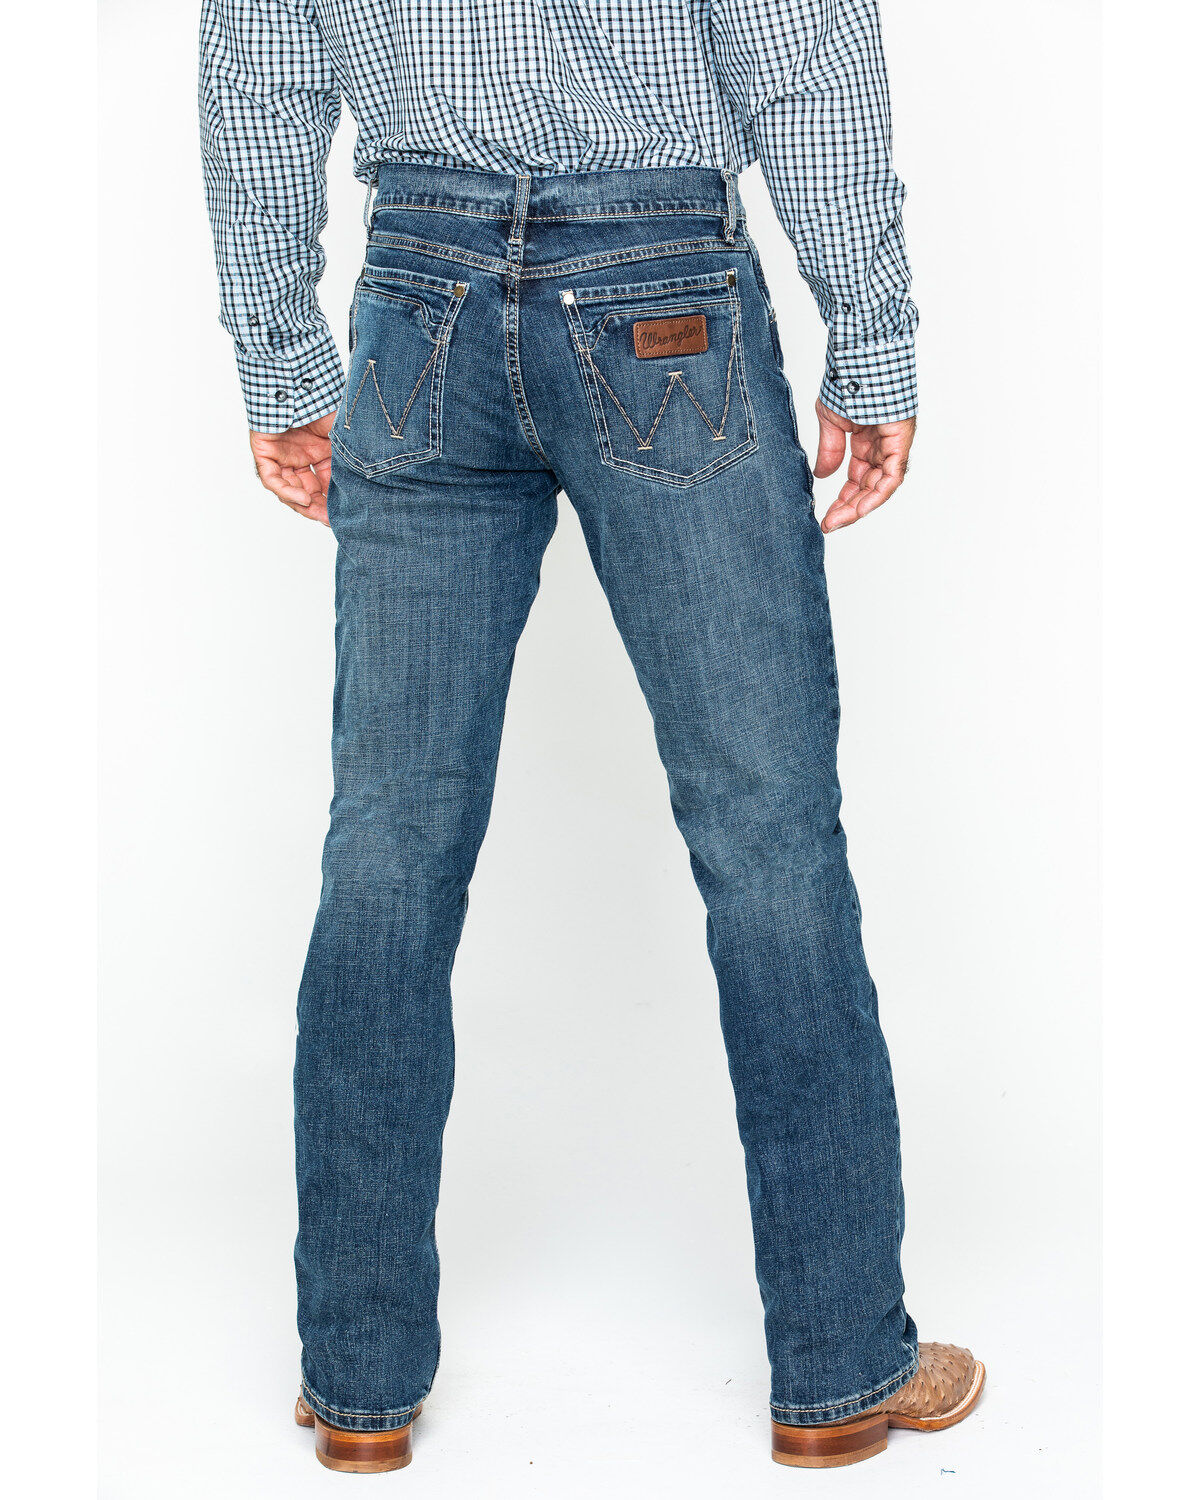 cheap wranglers jeans